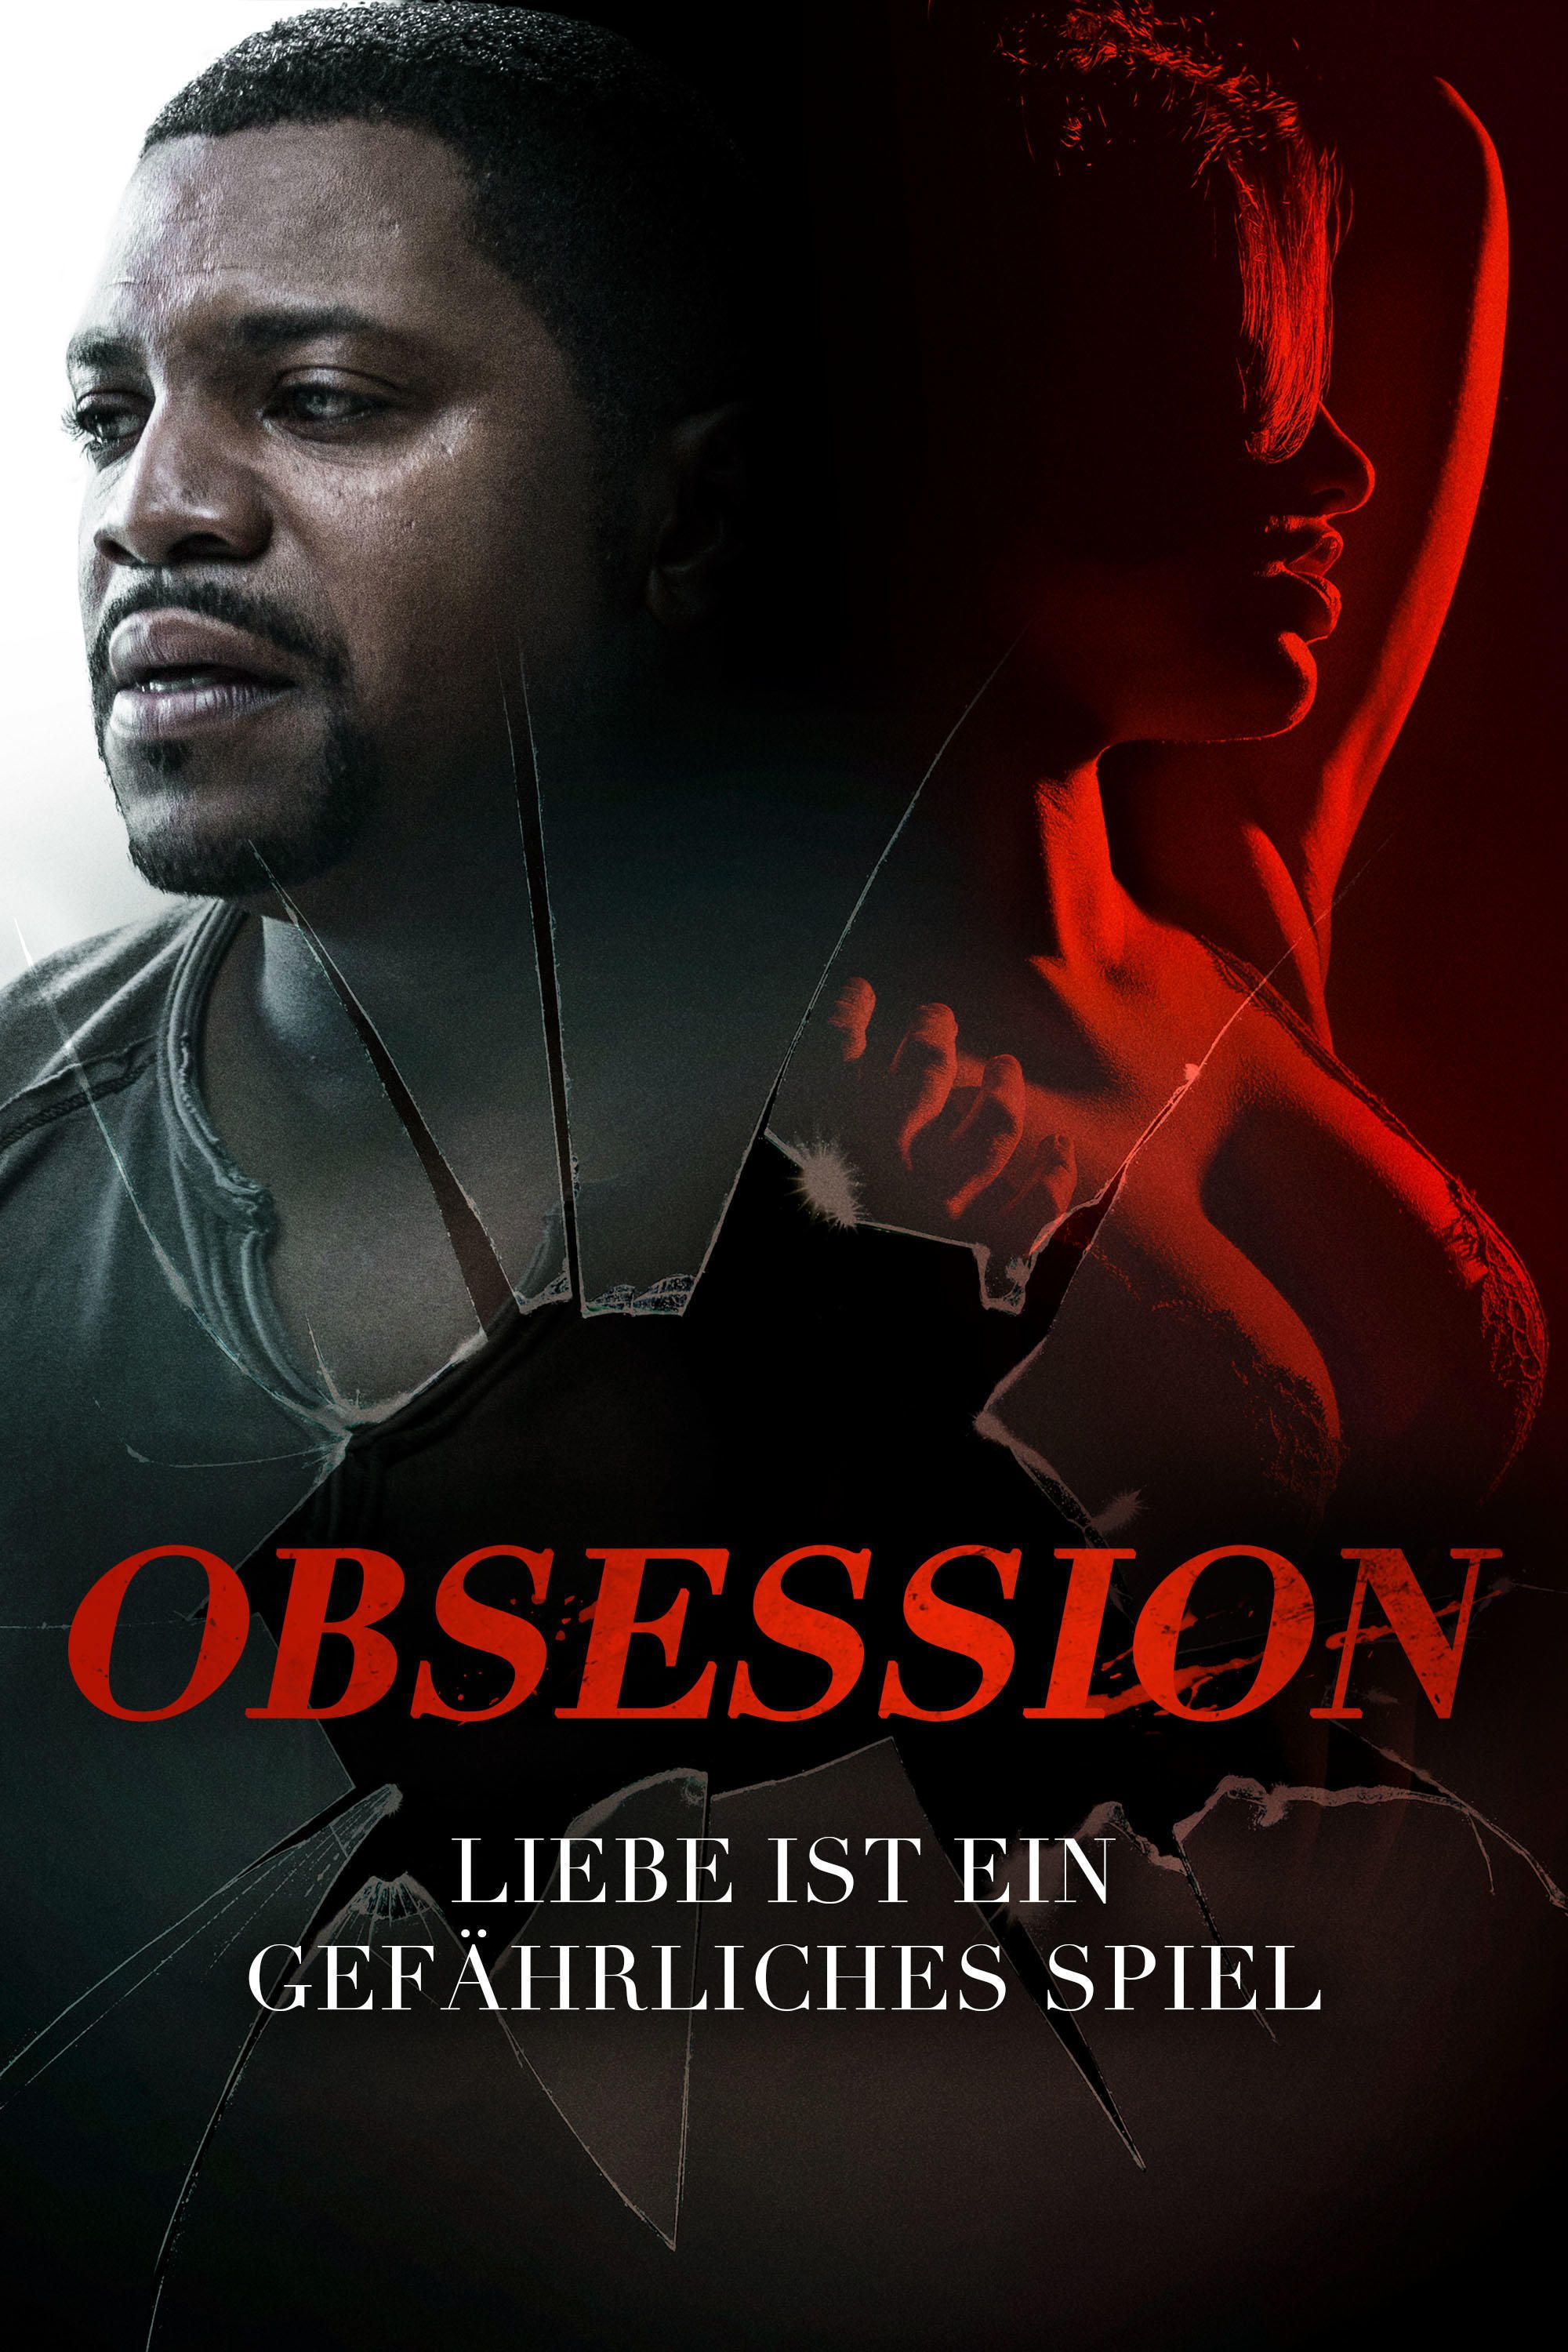 Obsession Movie Information & Trailers